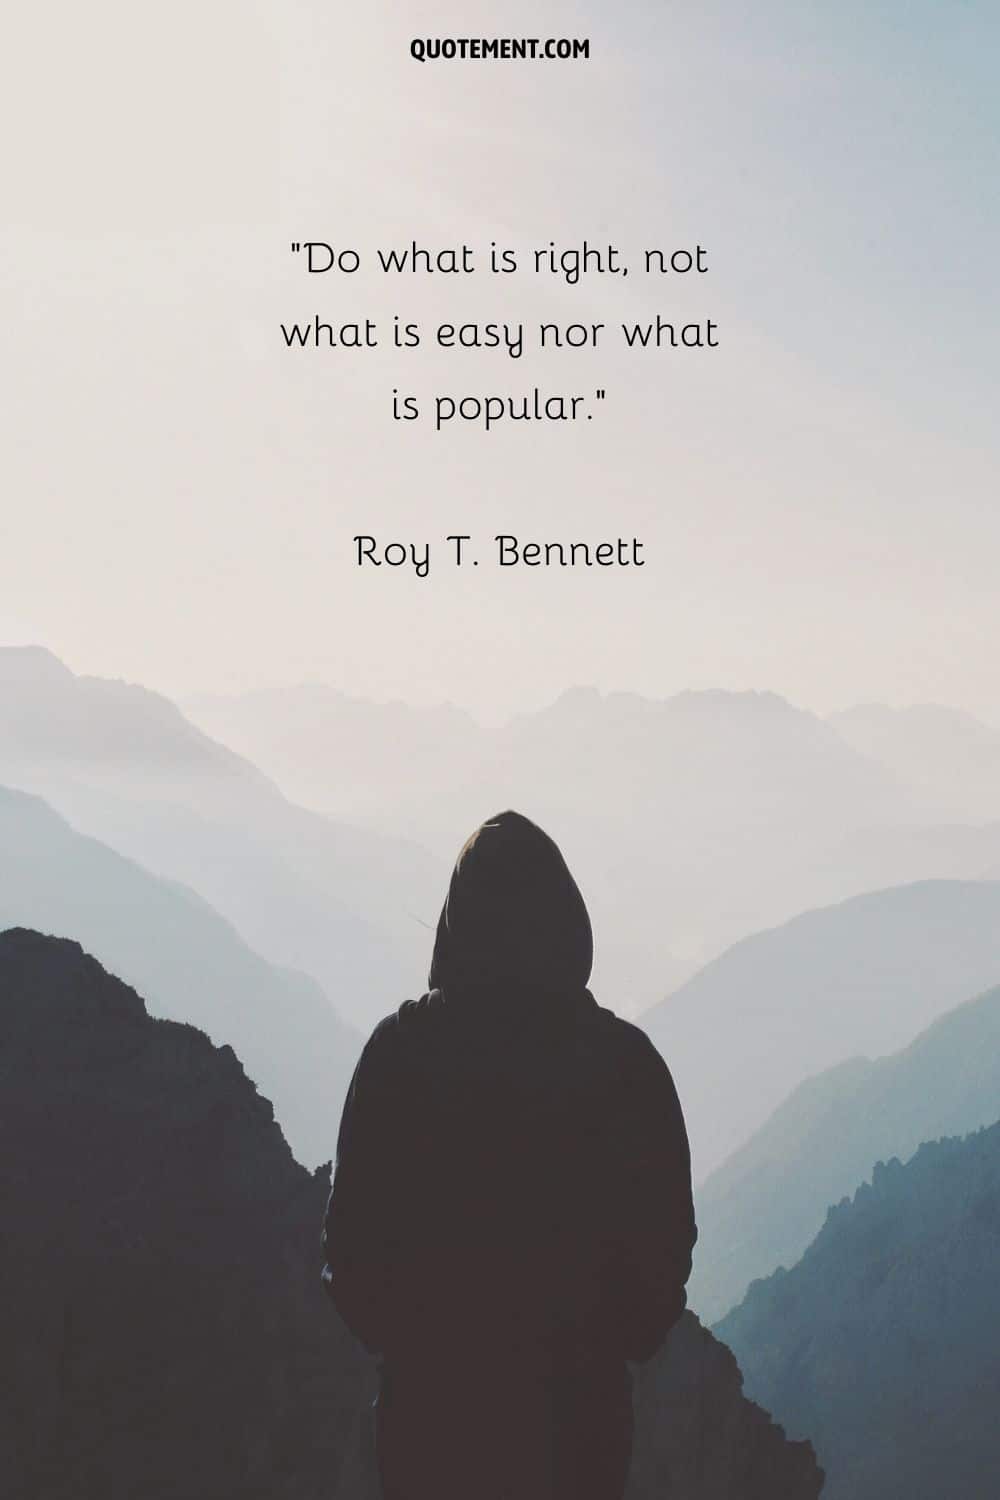 Do what is right, not what is easy nor what is popular.